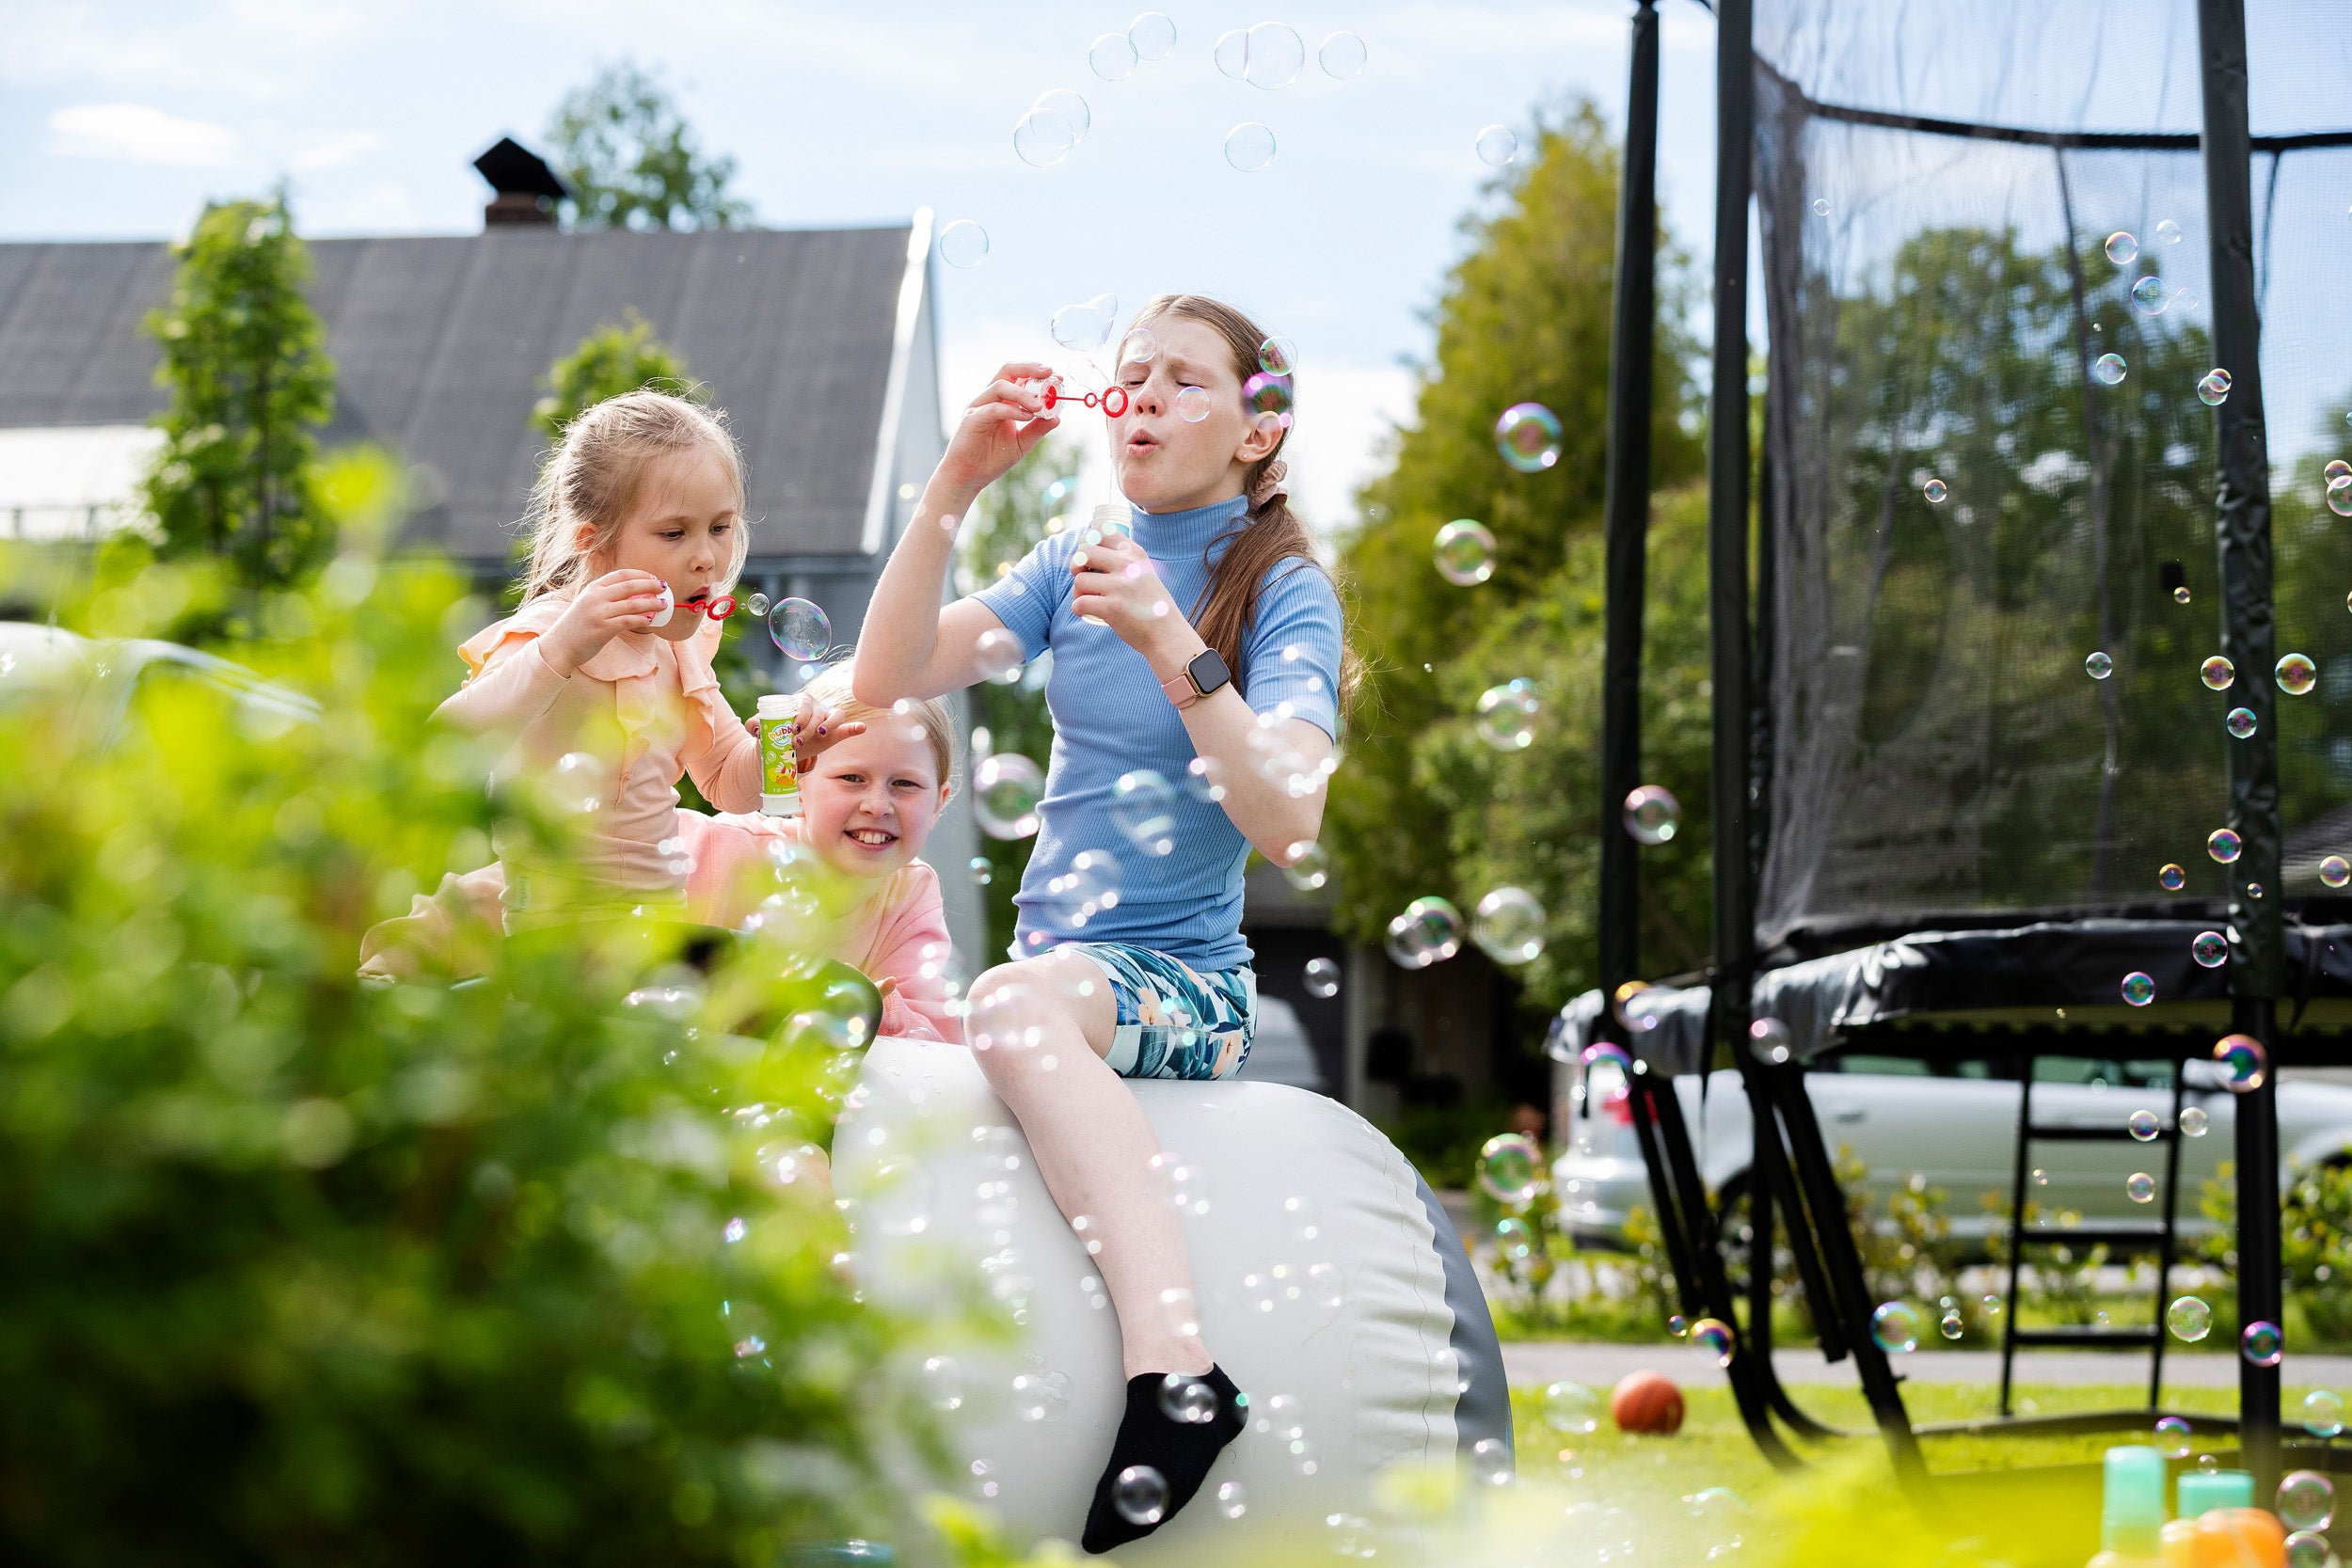 Kids blowing soap bubbles while sitting on an Airroll. There's a trampoline and green yard in the background.